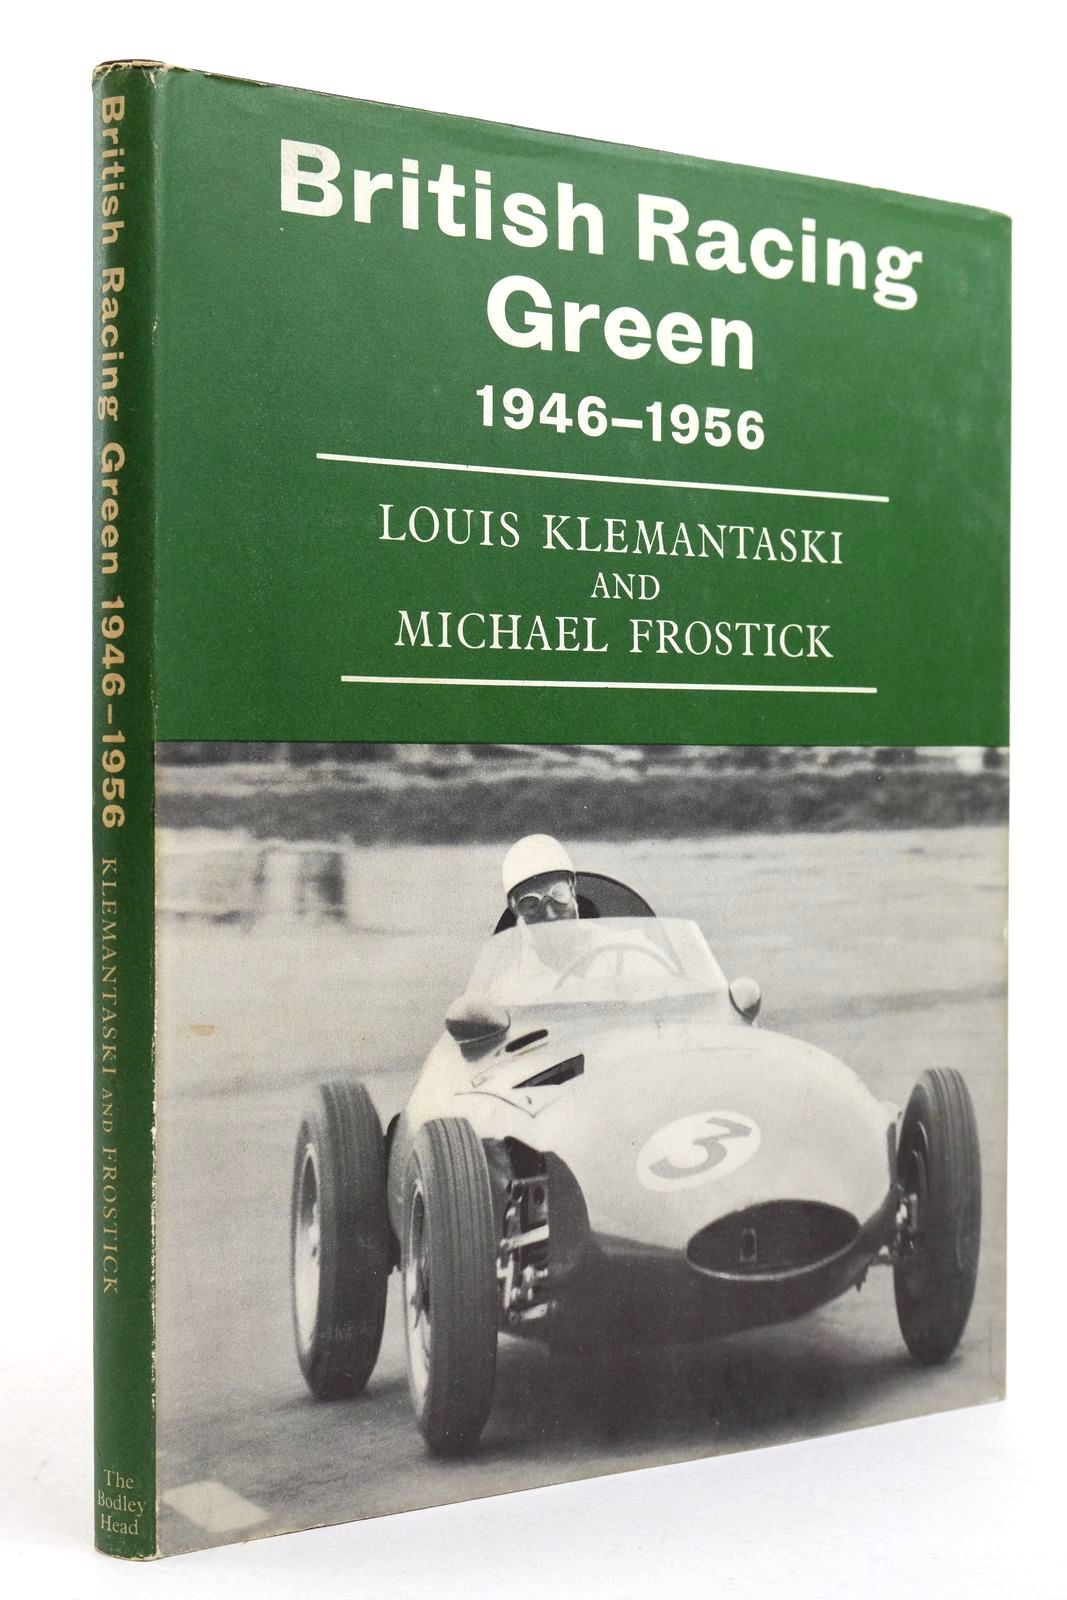 Photo of BRITISH RACING GREEN 1946-1956 written by Klemantaski, Louis
Frostick, Michael published by The Bodley Head (STOCK CODE: 2140122)  for sale by Stella & Rose's Books